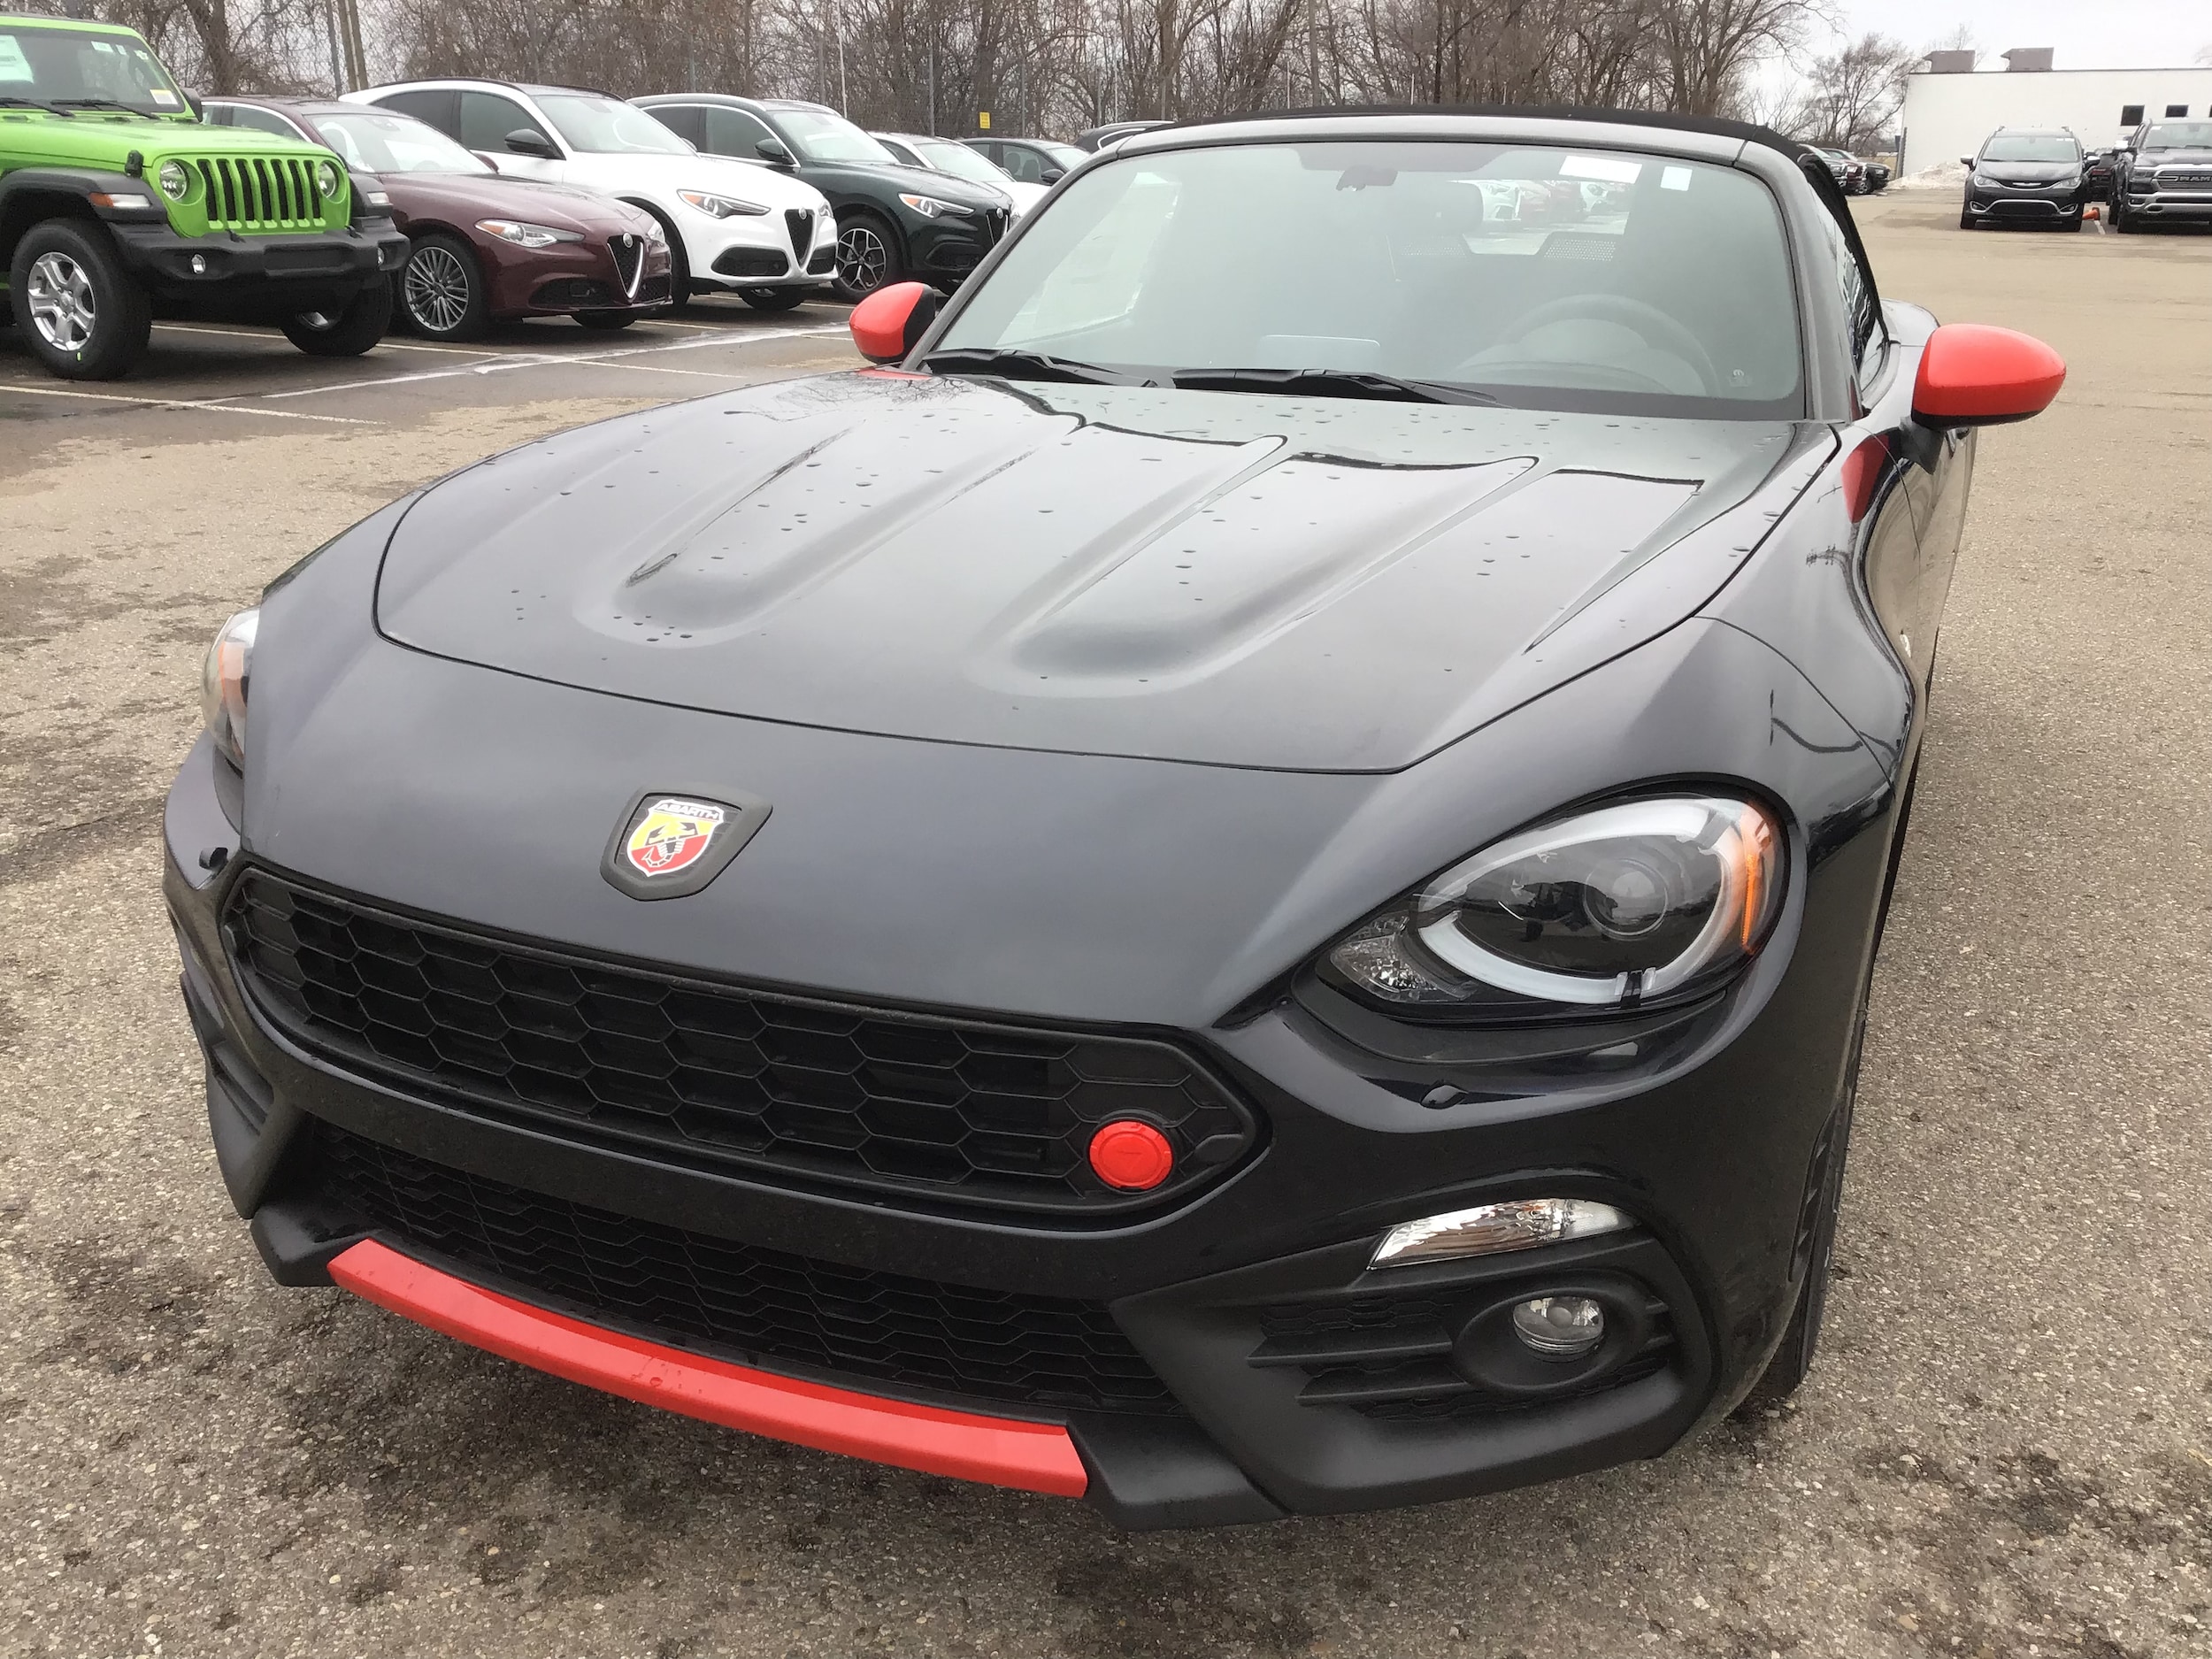 New 2019 Fiat 124 Spider For Sale In Bloomfield Hills Mi